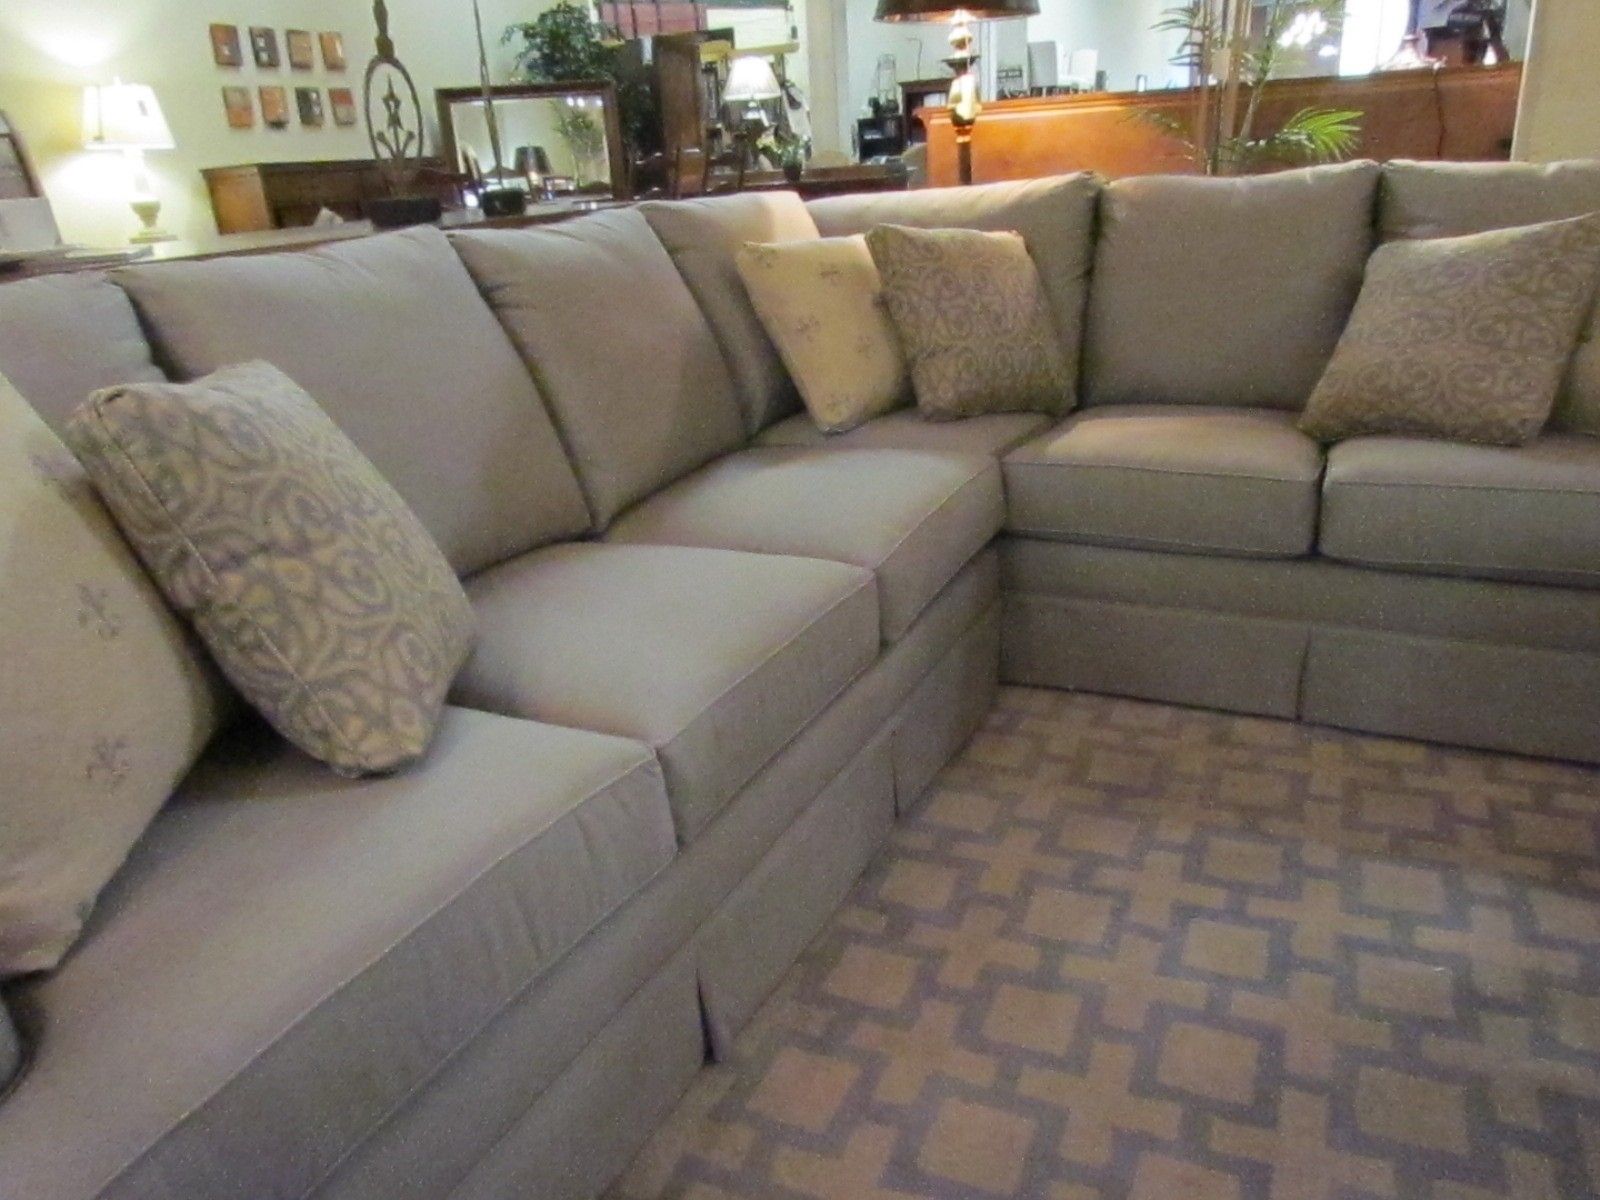 This Sectional Sofa Has Enough Room For The Entire Family Even In Durable Sectional Sofa (View 8 of 15)